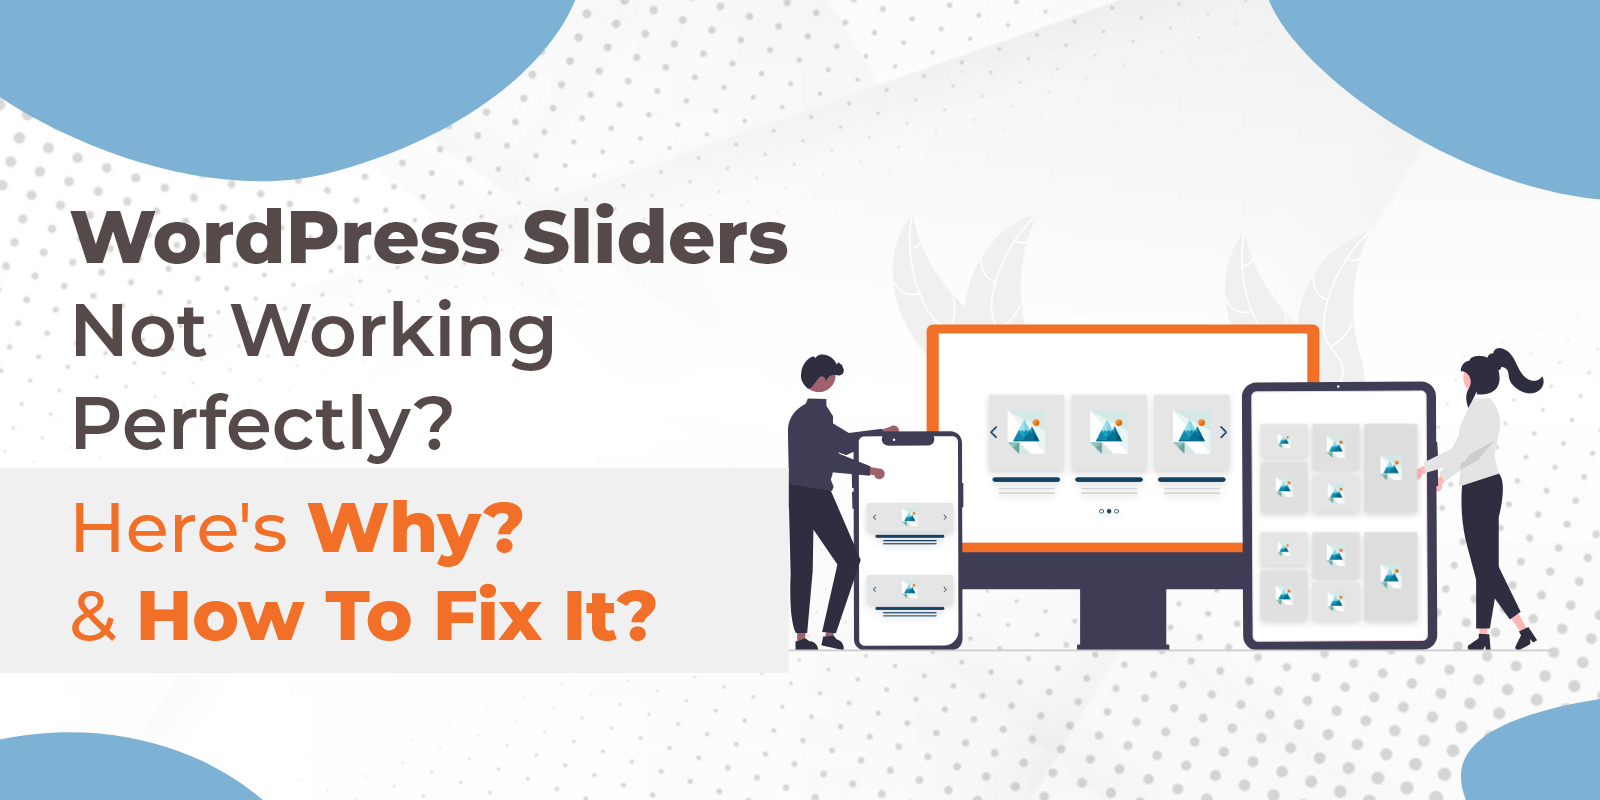 WordPress Sliders Not Working Perfectly Here's Why & How To Fix It